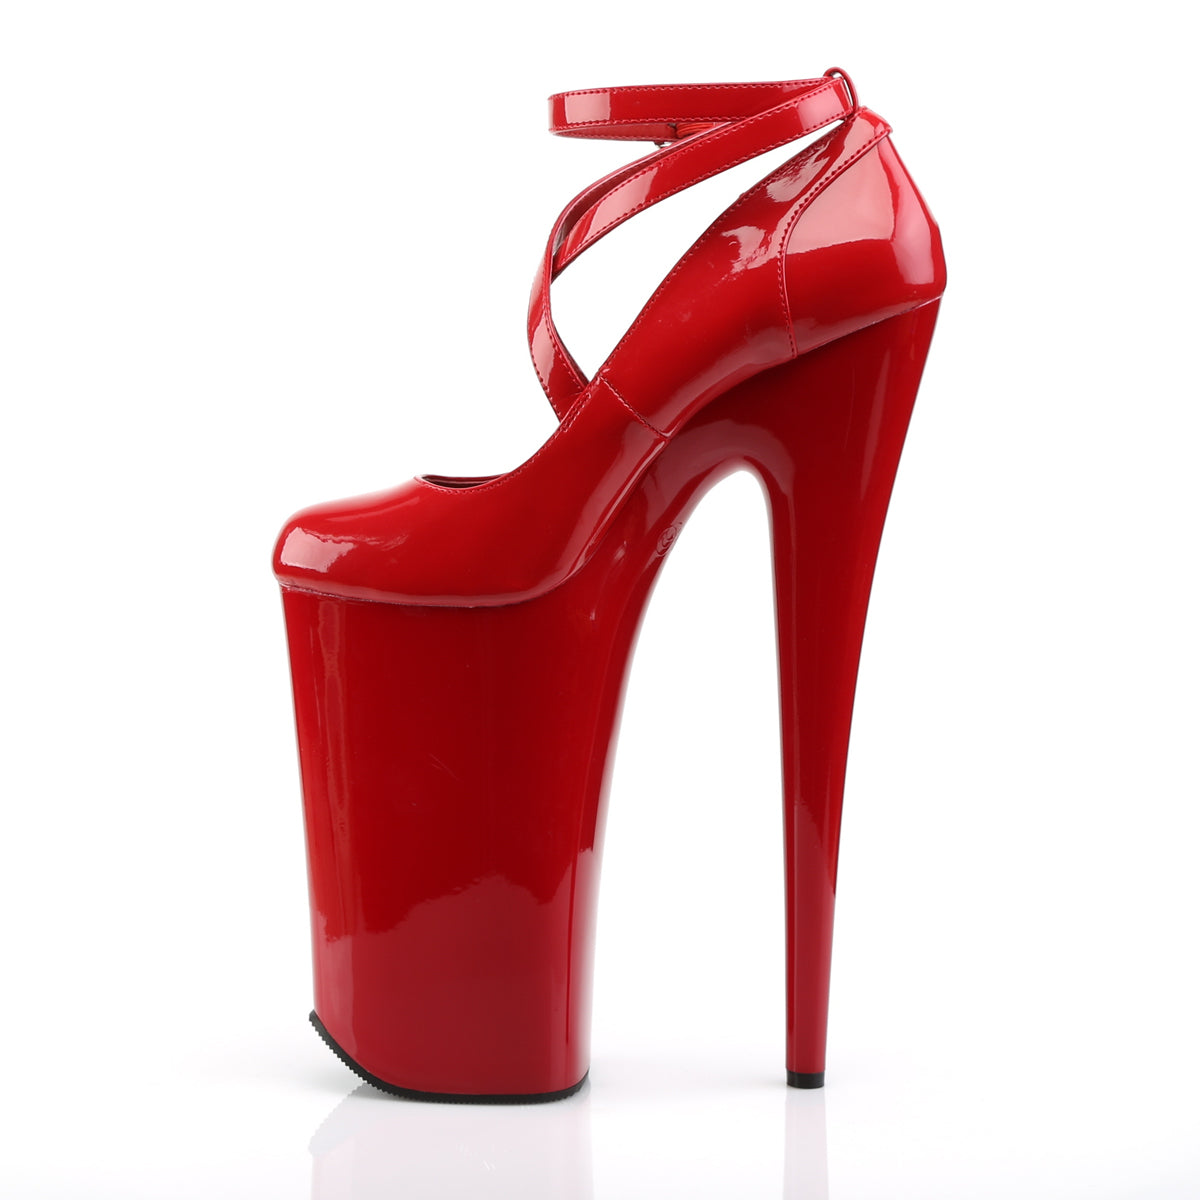 BEYOND-087 Pleasers Sexy 10" Heel Red Pole Dancing Platforms-Pleaser- Sexy Shoes Pole Dance Heels